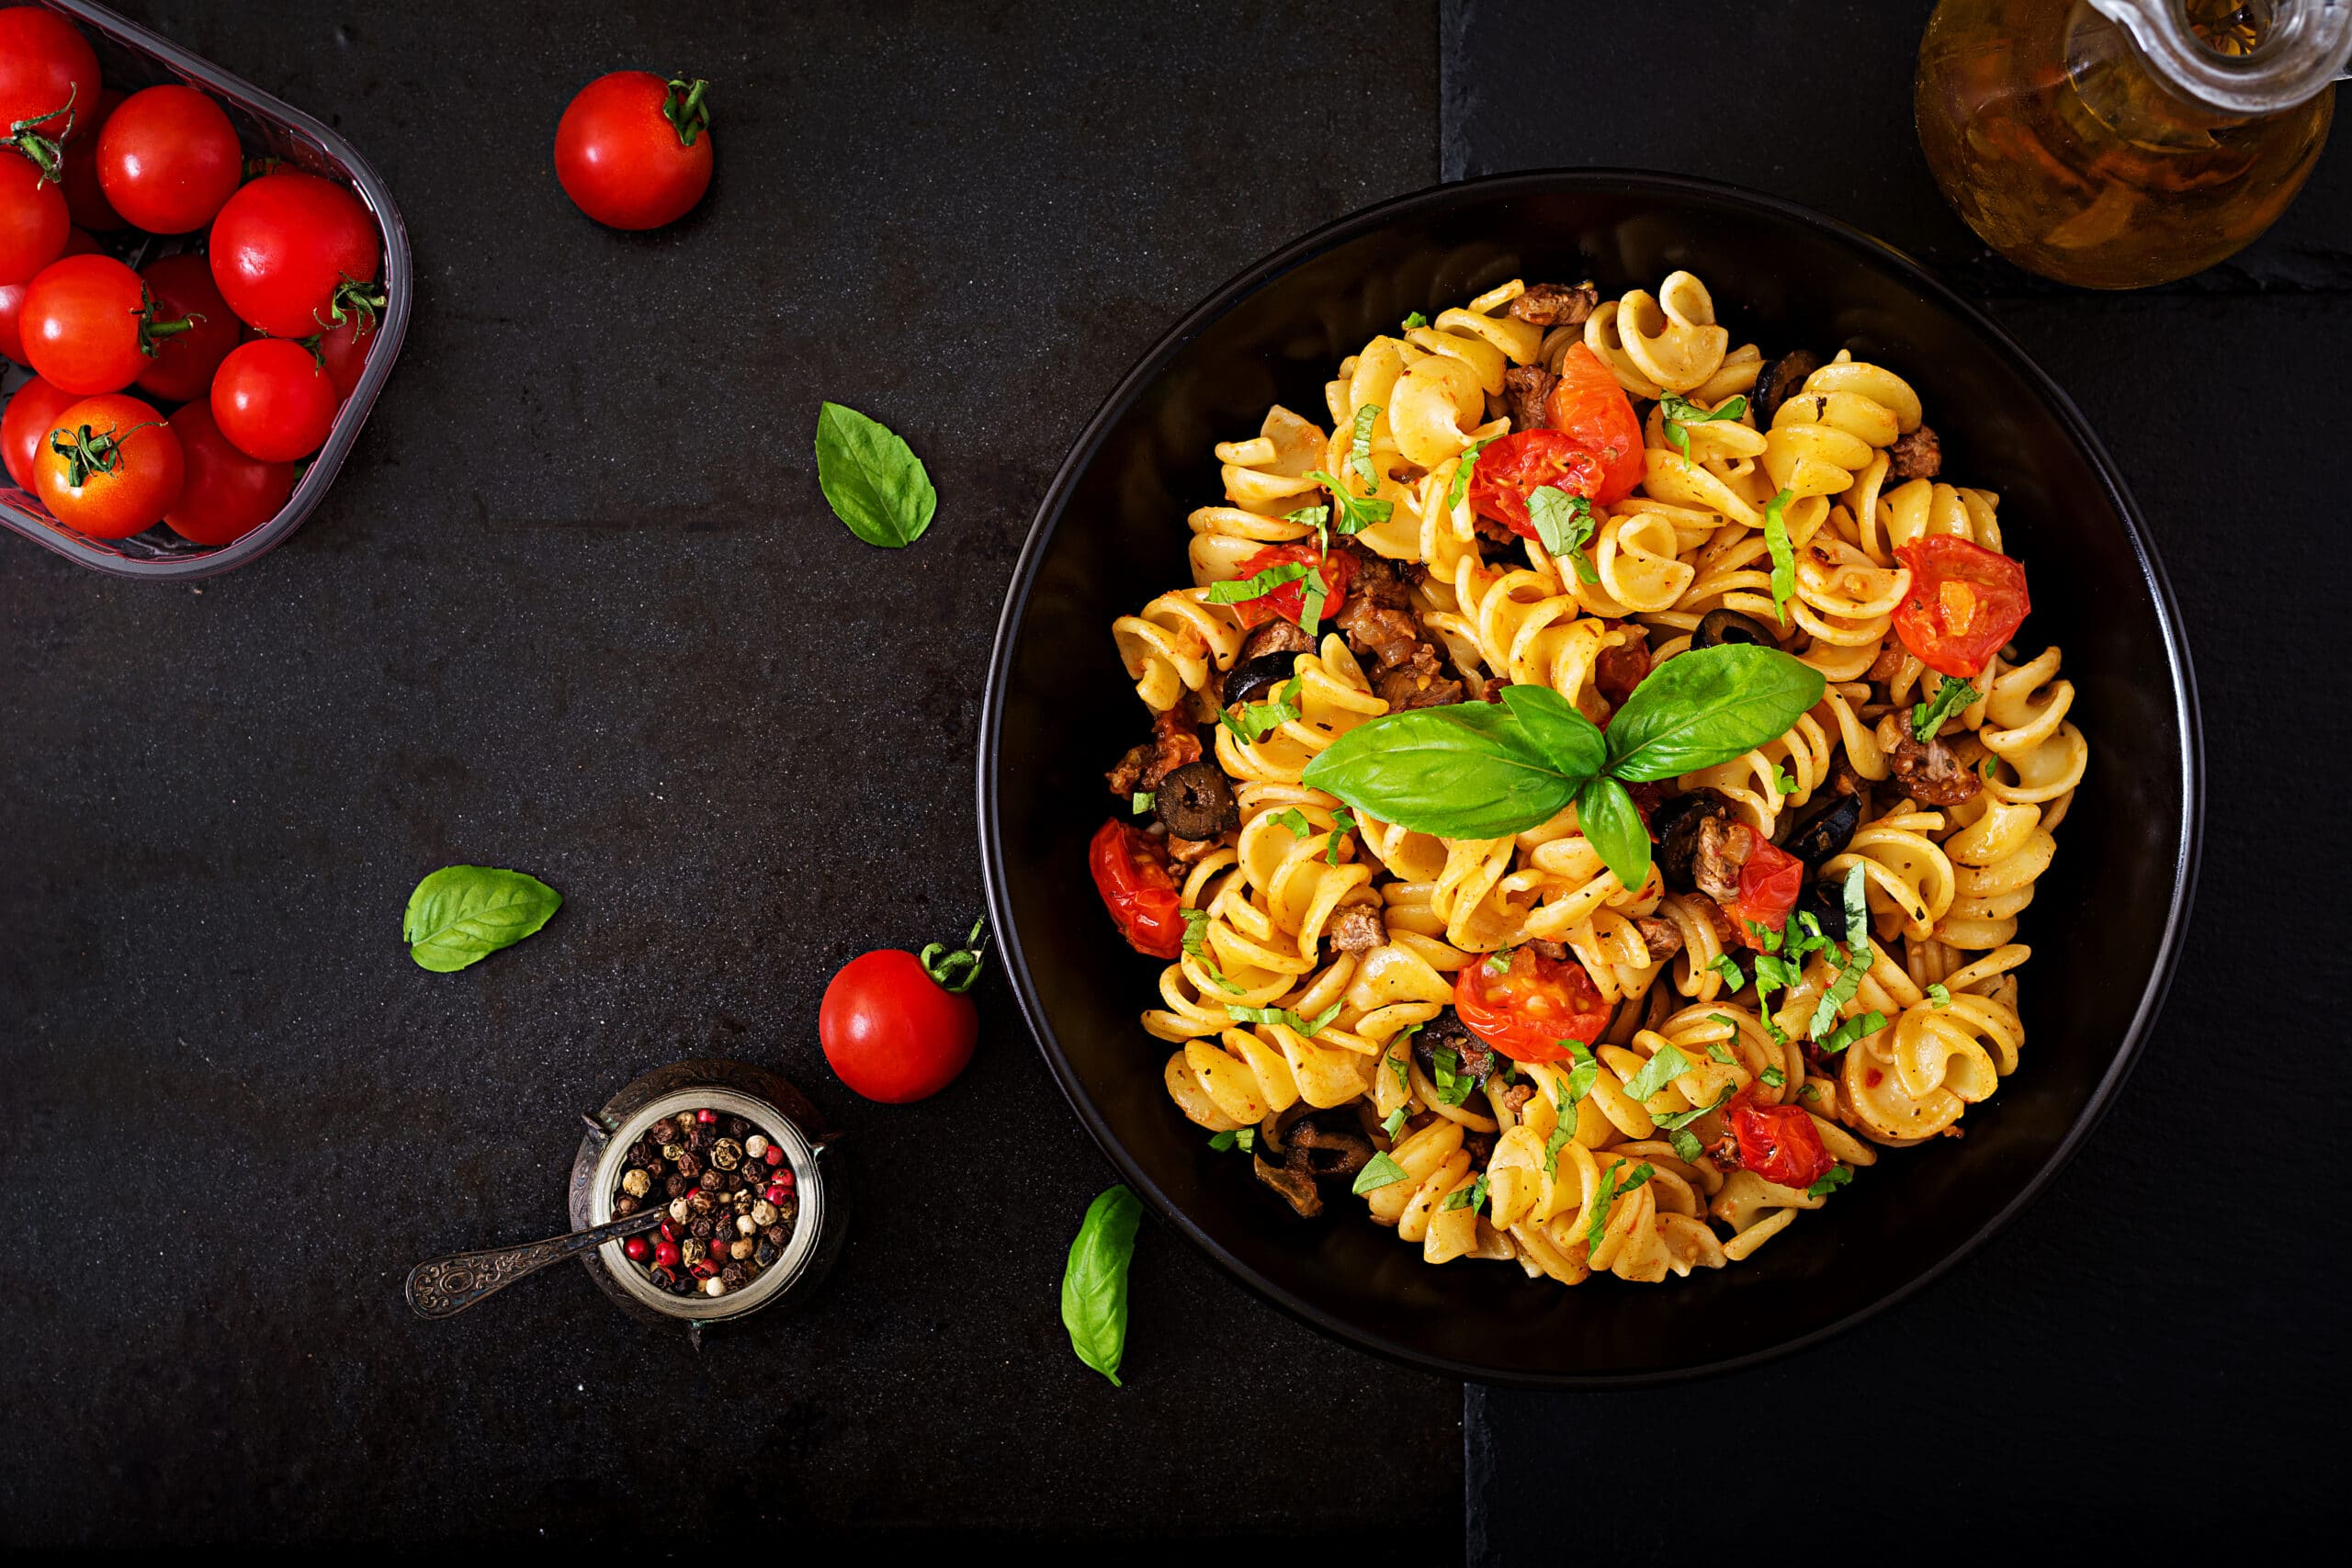 Pasta,Fusilli,With,Tomatoes,,Beef,And,Basil,In,Black,Bowl